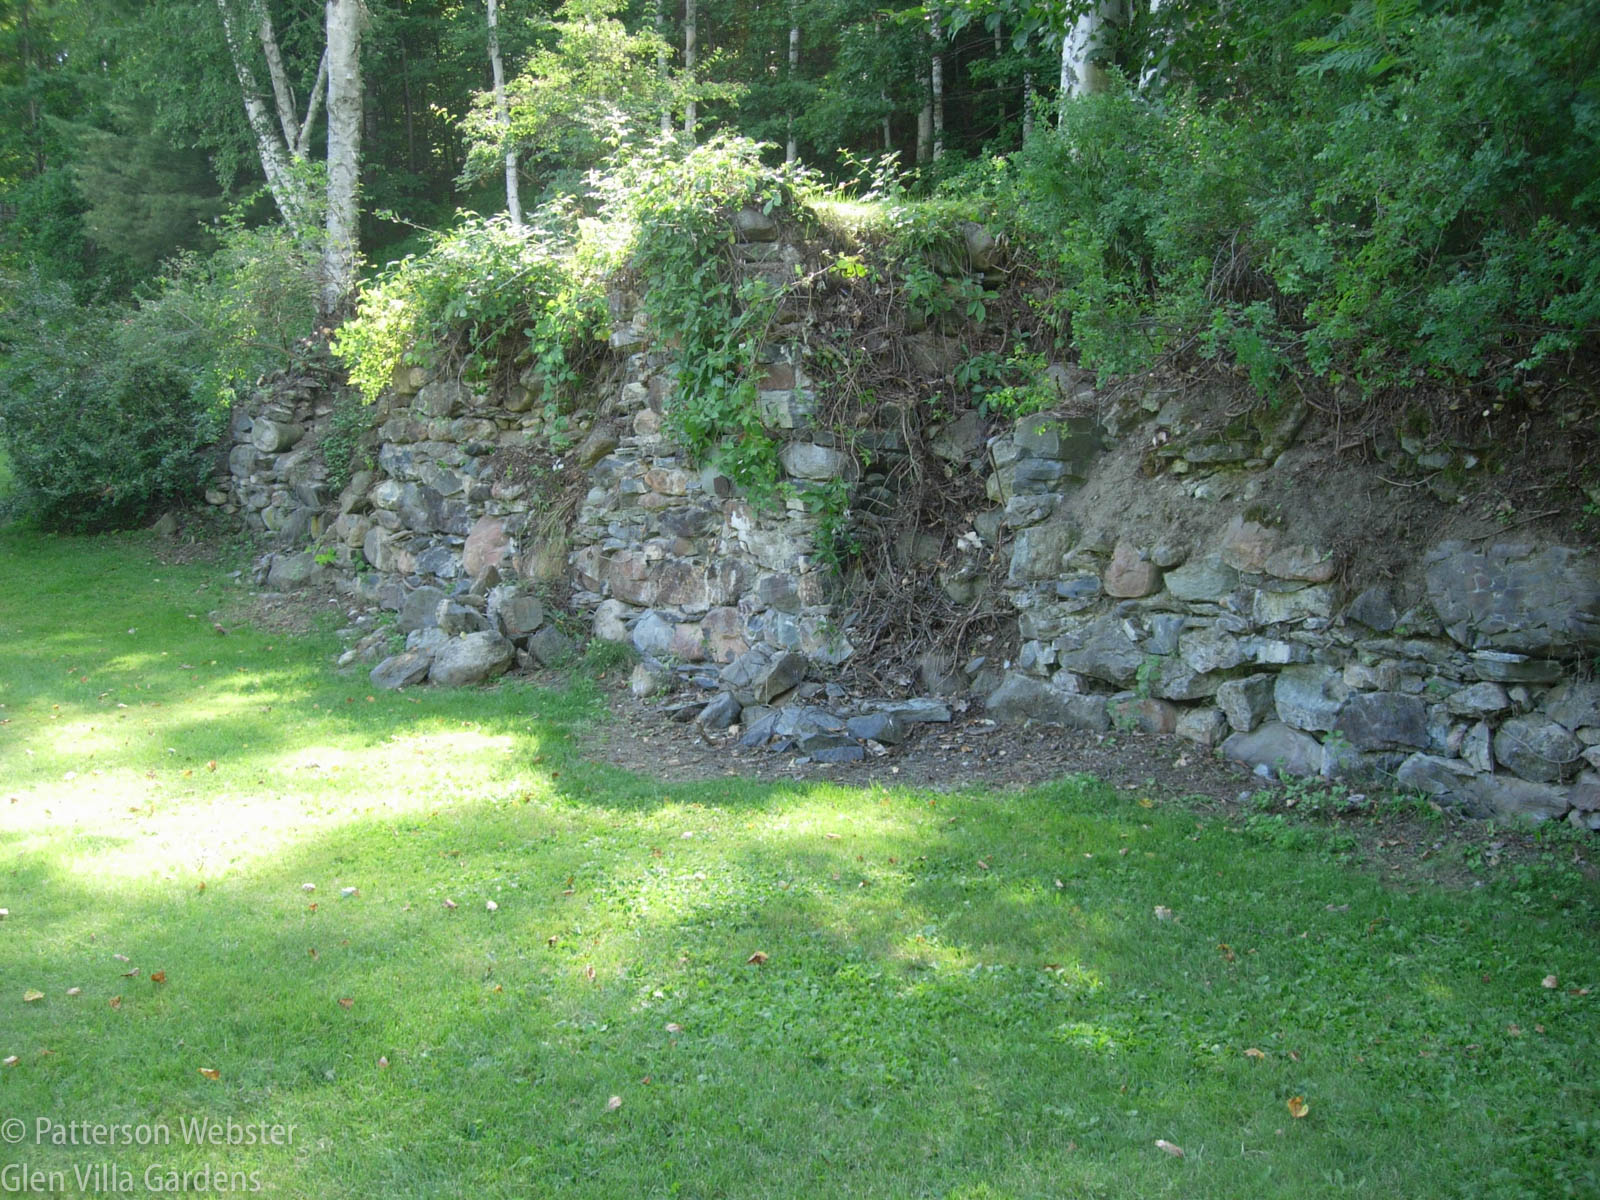 The foundation wall is about 14 ft high at its tallest point.